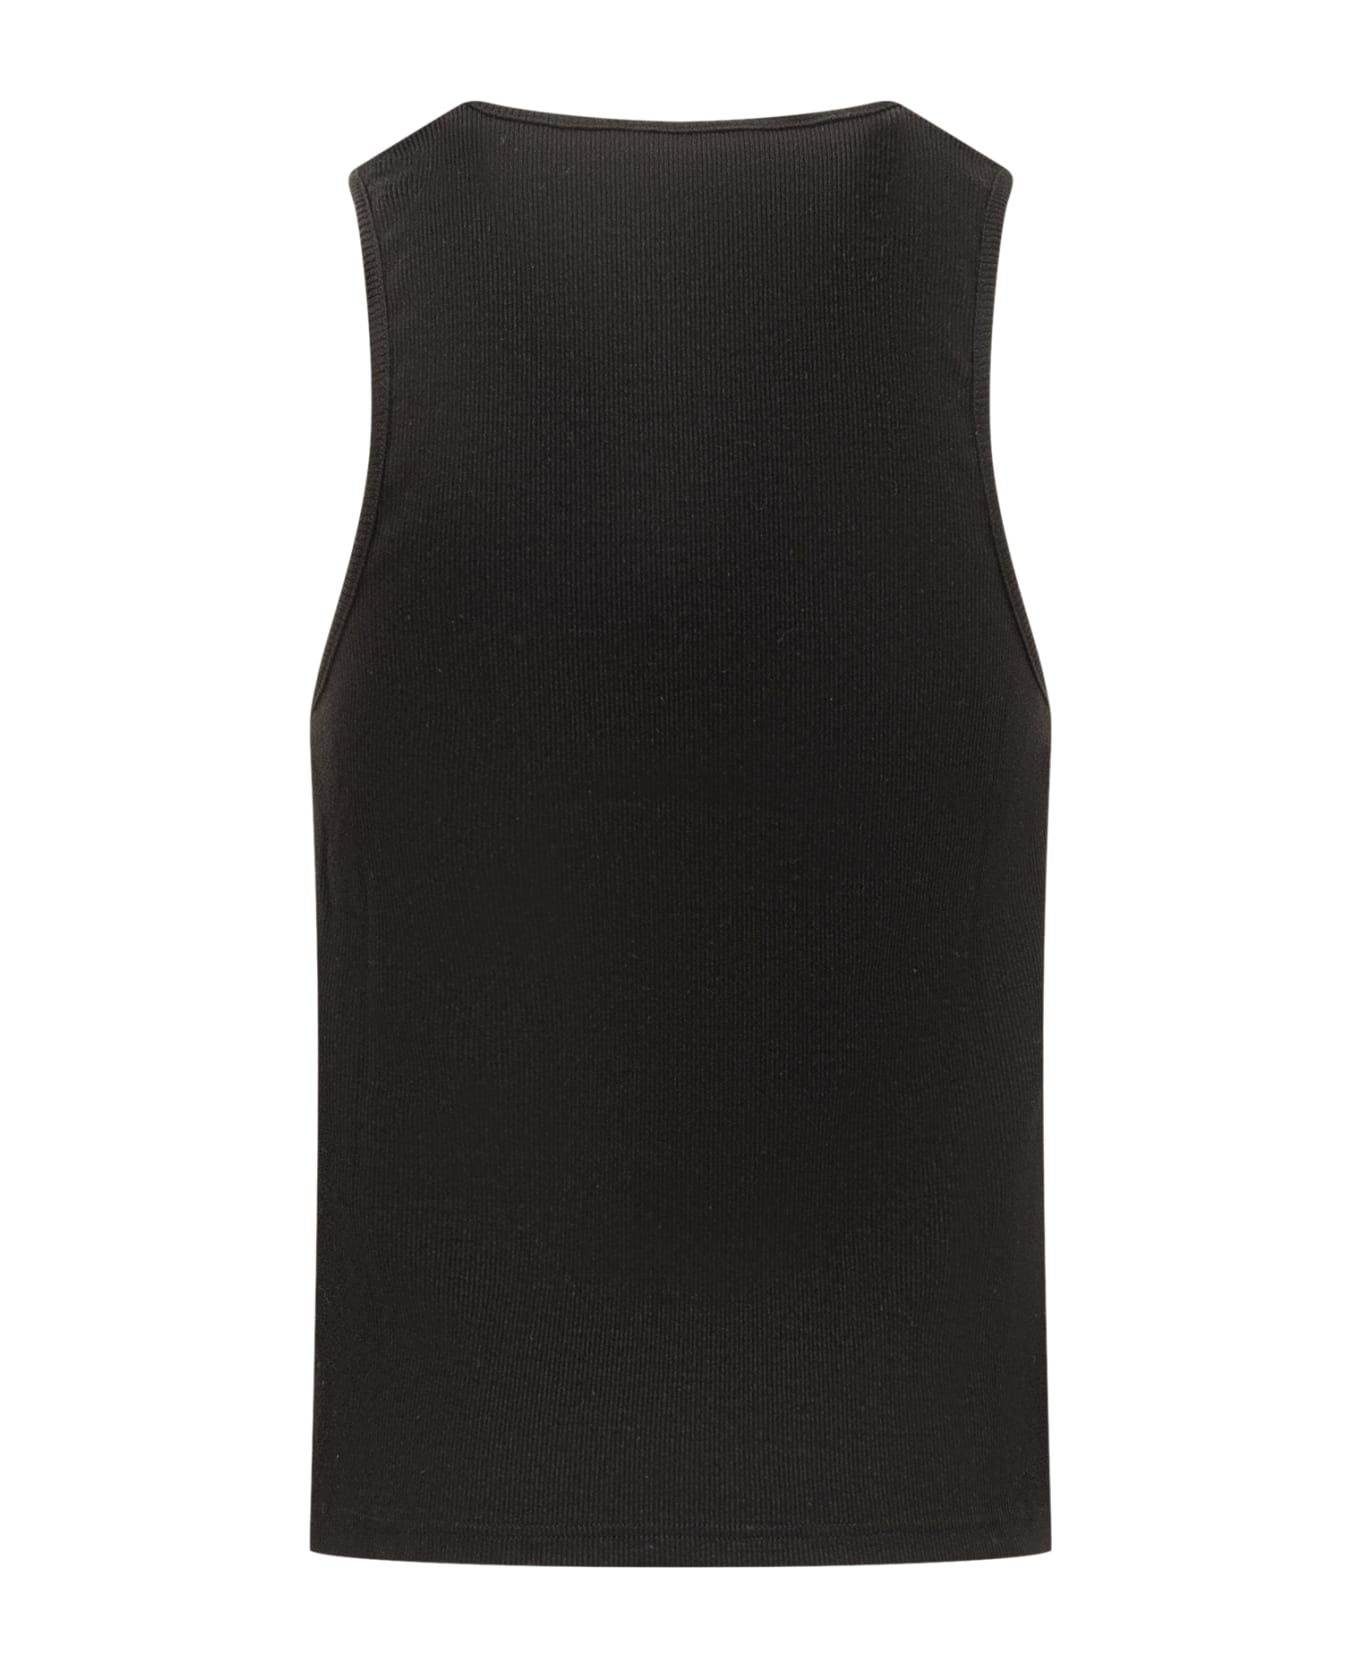 J.W. Anderson Anchor Embroidery Tank Top - Black